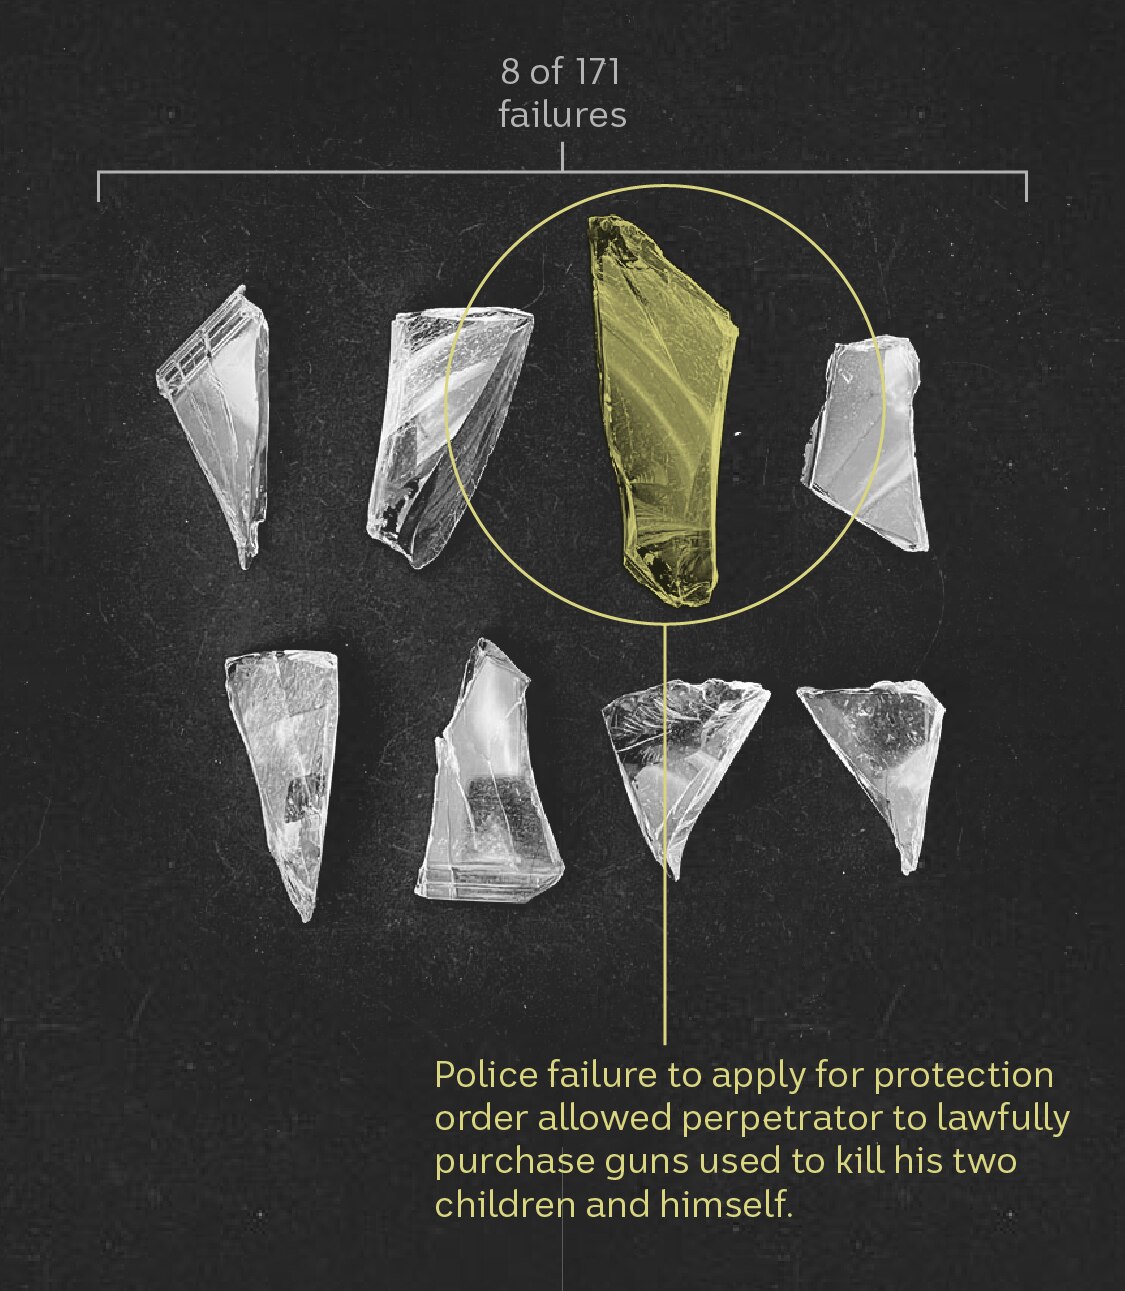 8 shards of glass representing breaches of firearm procedures